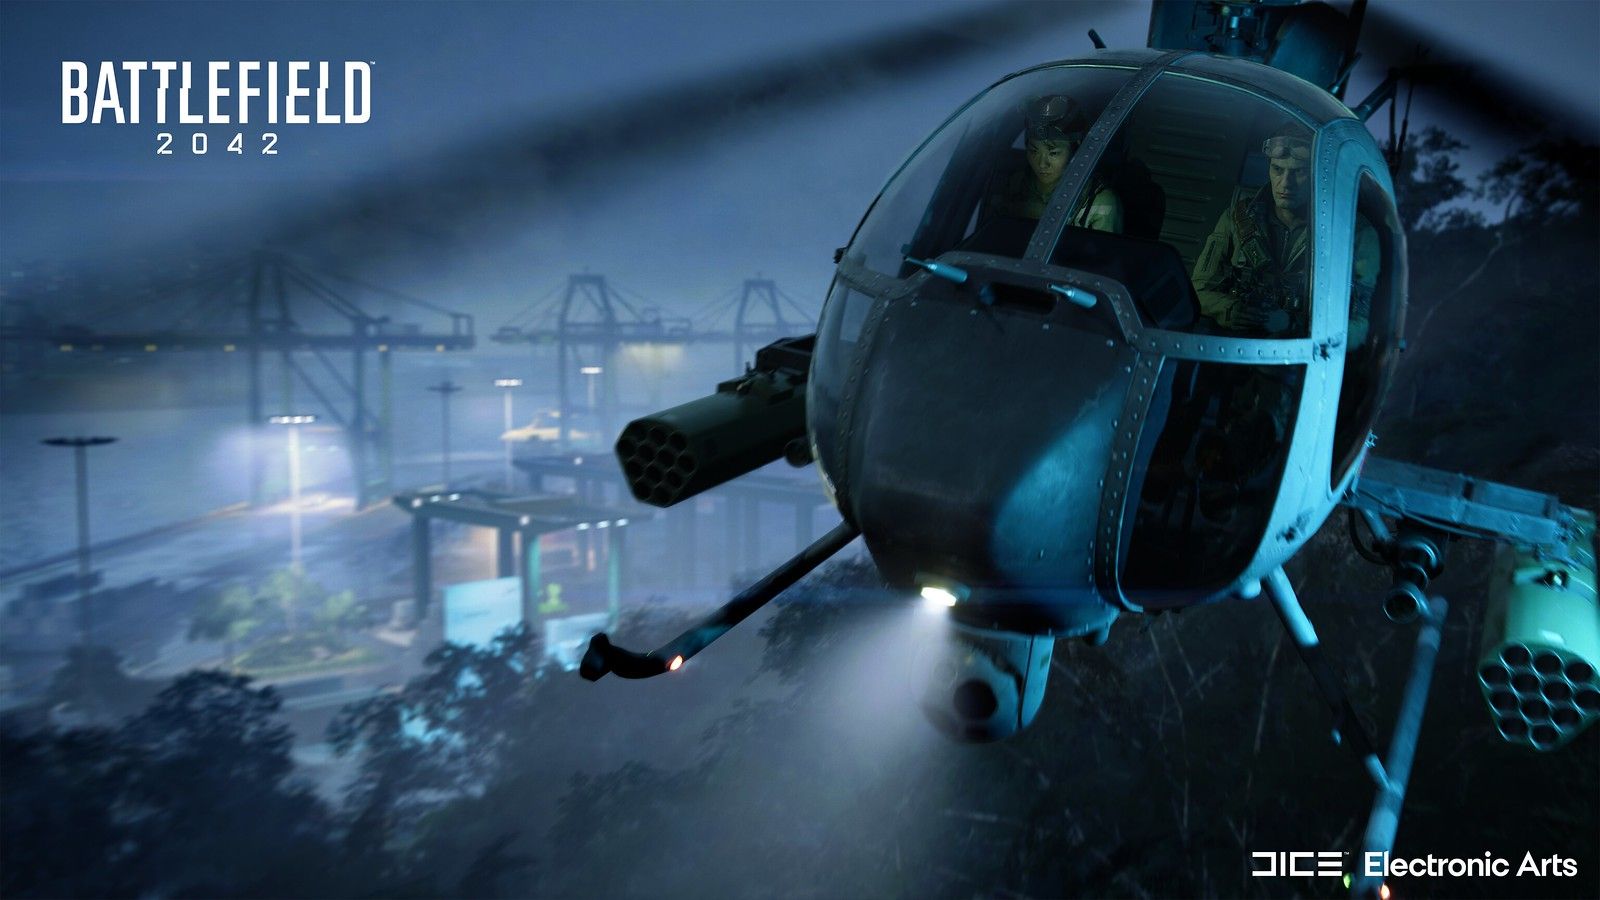 Battlefield 2042 launches October 22 on PS4 and PS5: first details – PlayStation.Blog